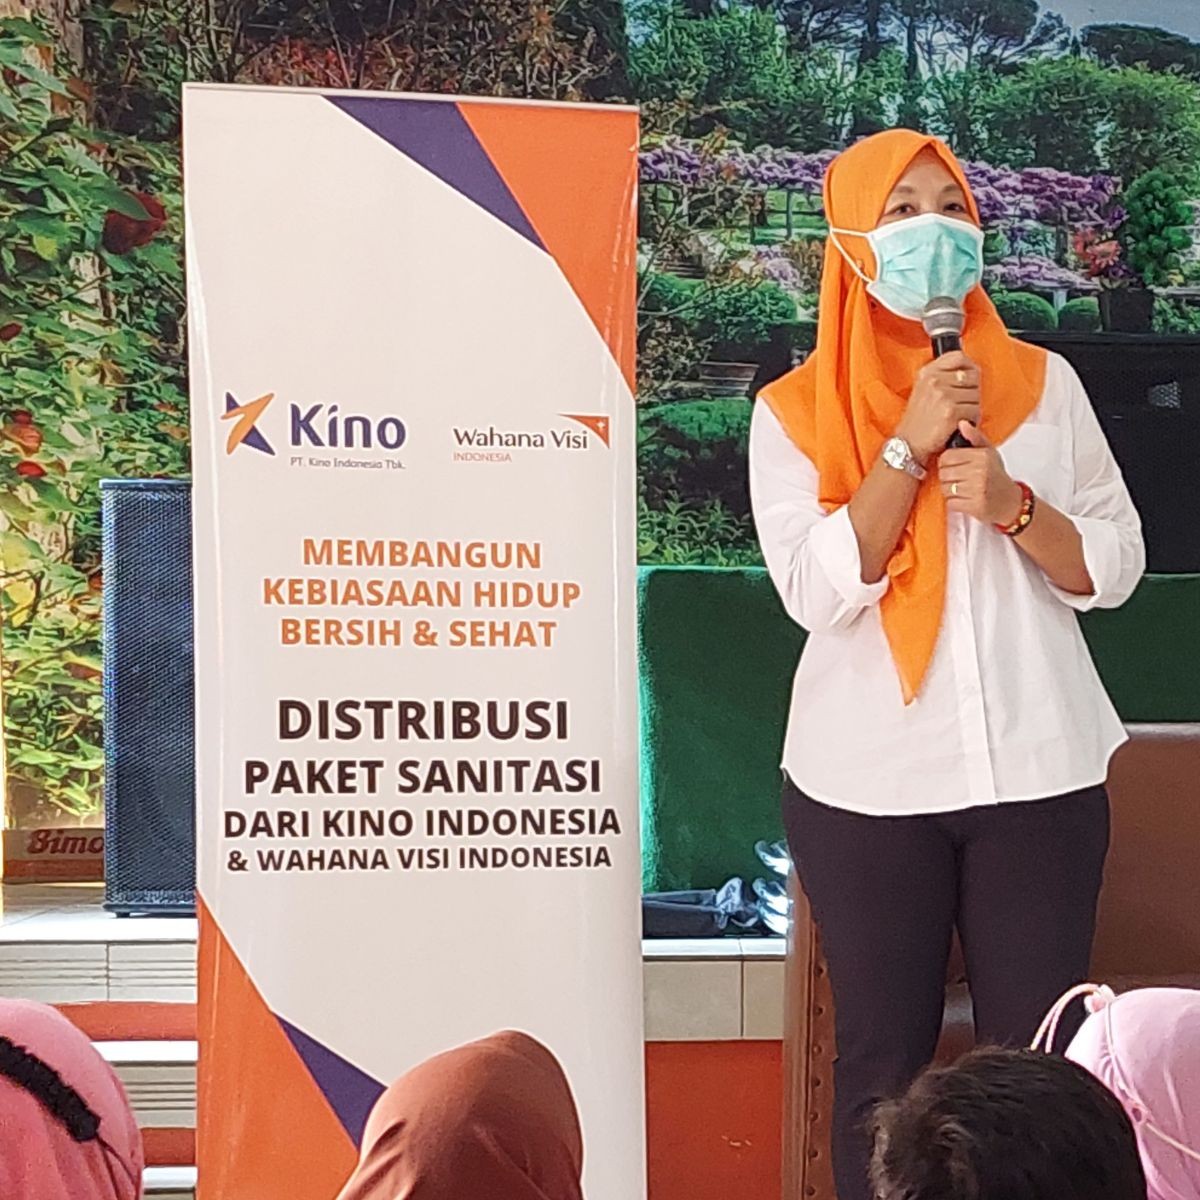 Supporting the Community Against Covid-19, PT Kino Indonesia Tbk Provides Cleaning Packages